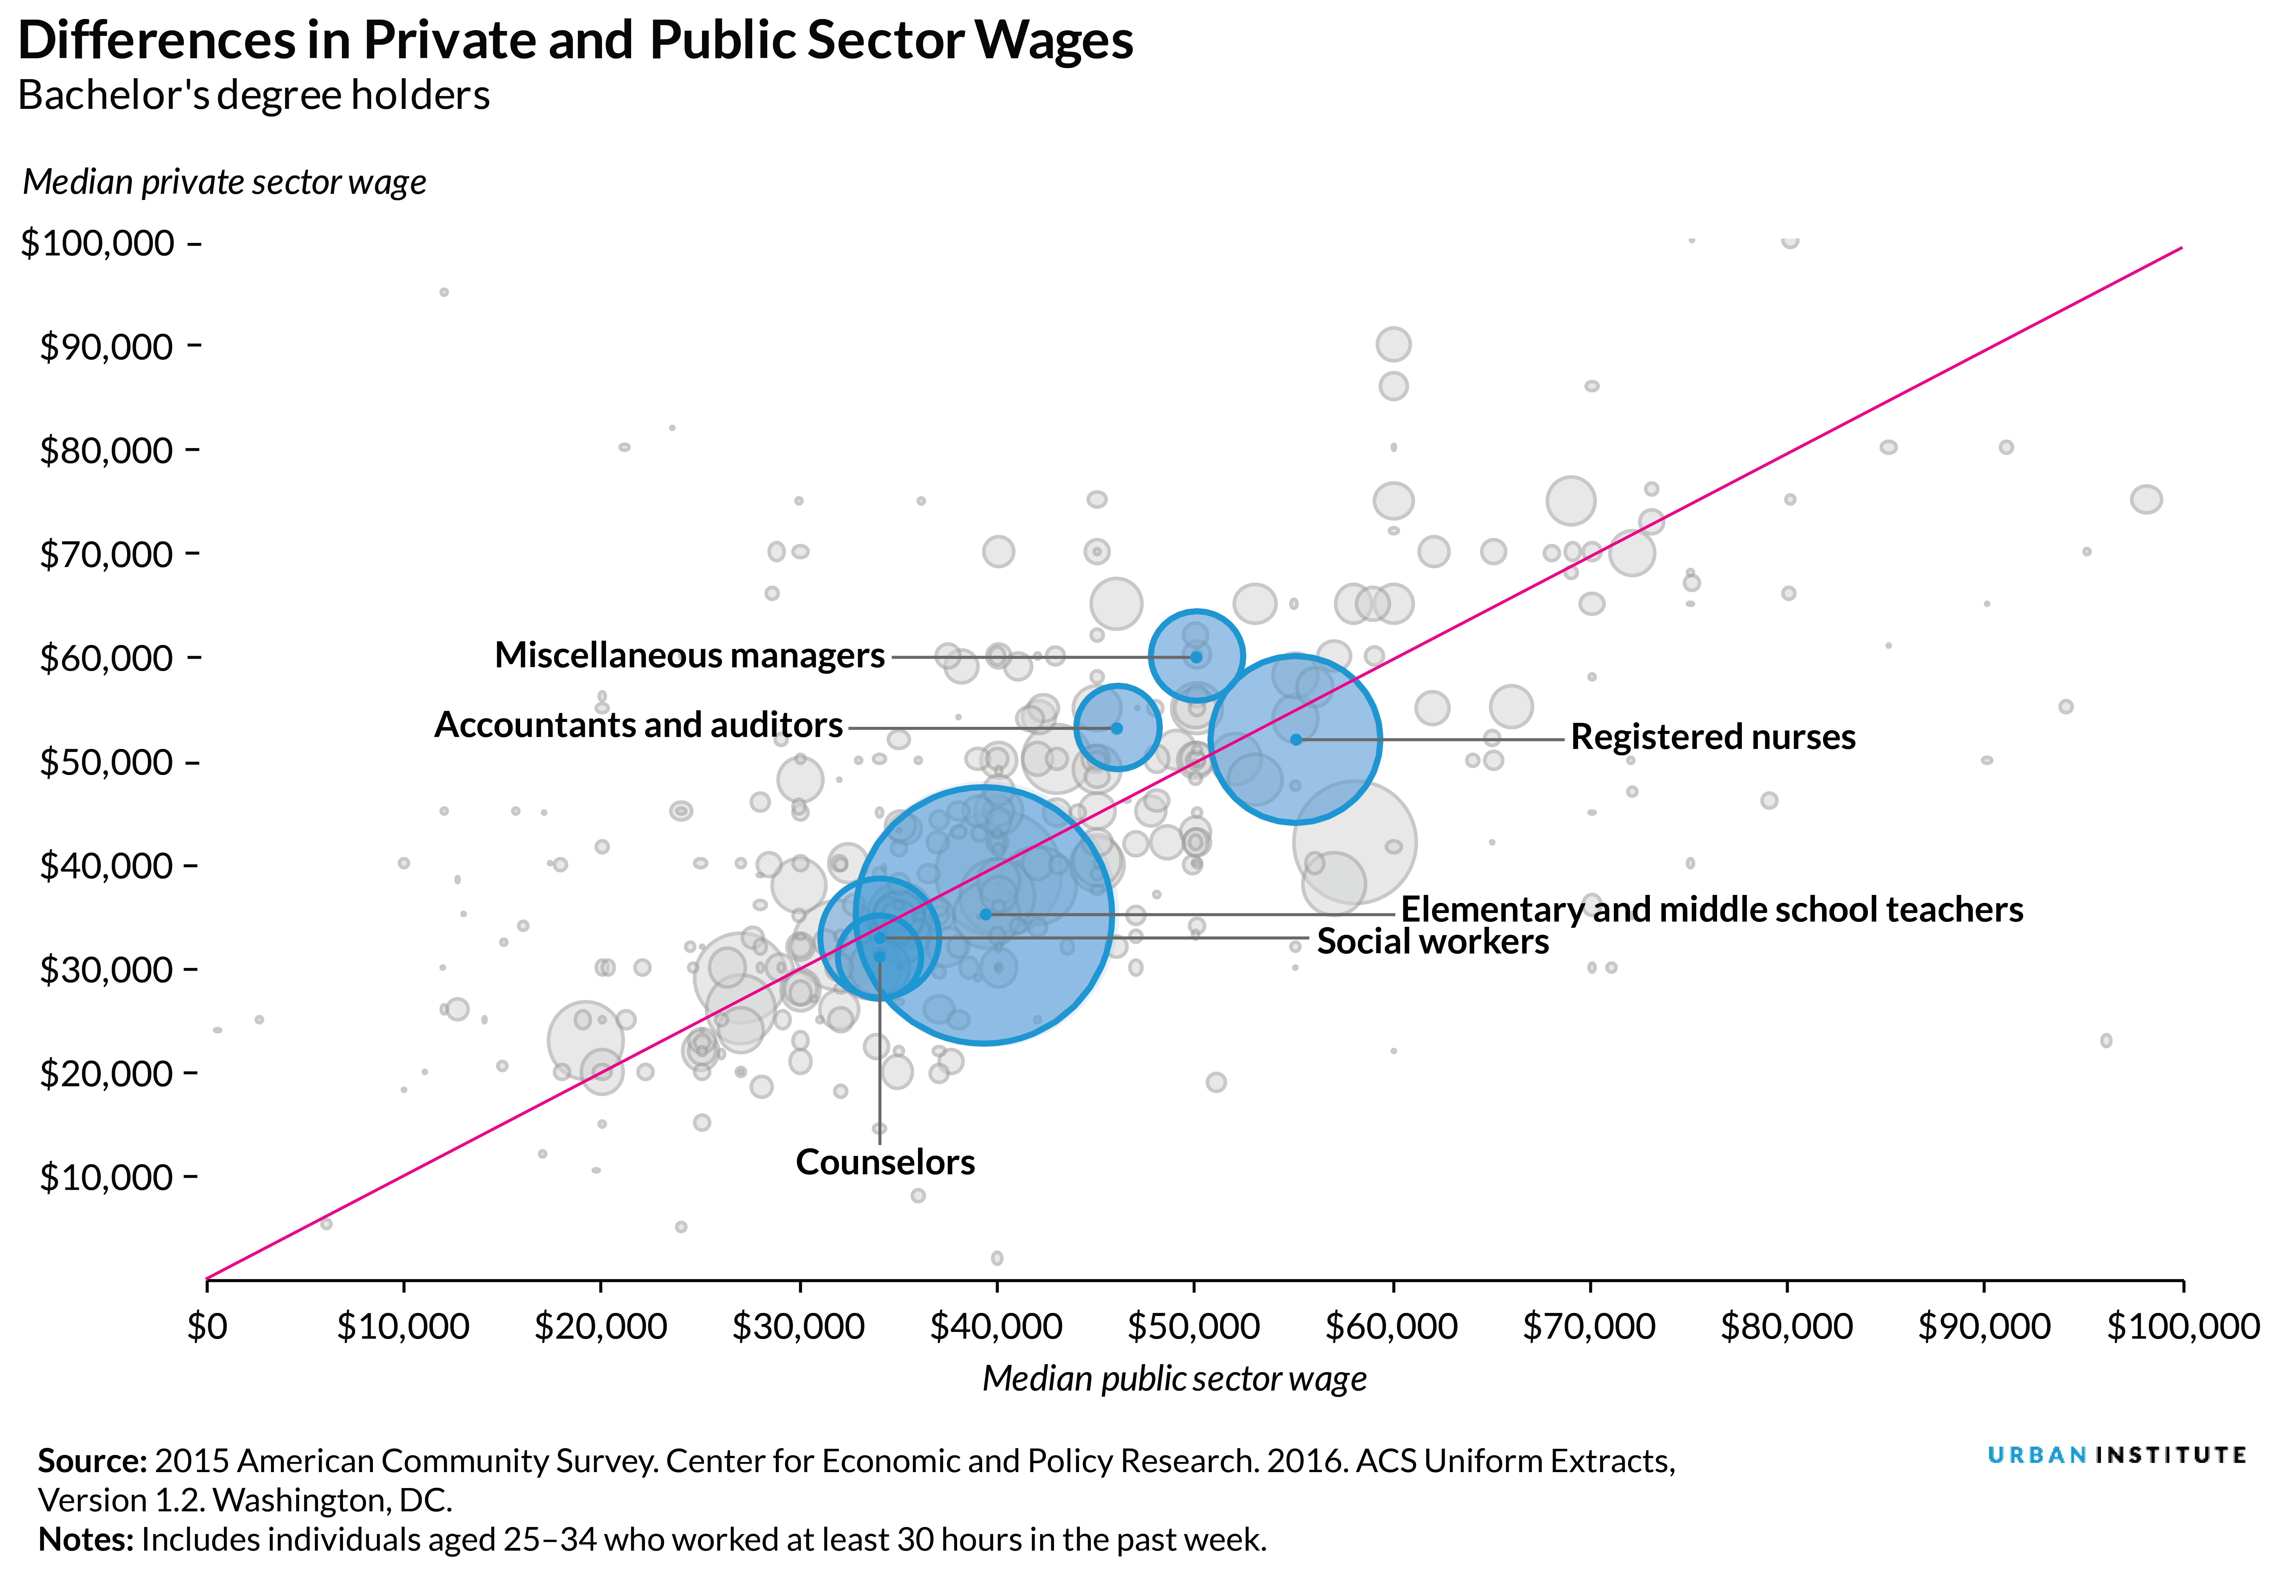 Differences in Private and Public Sector Wages